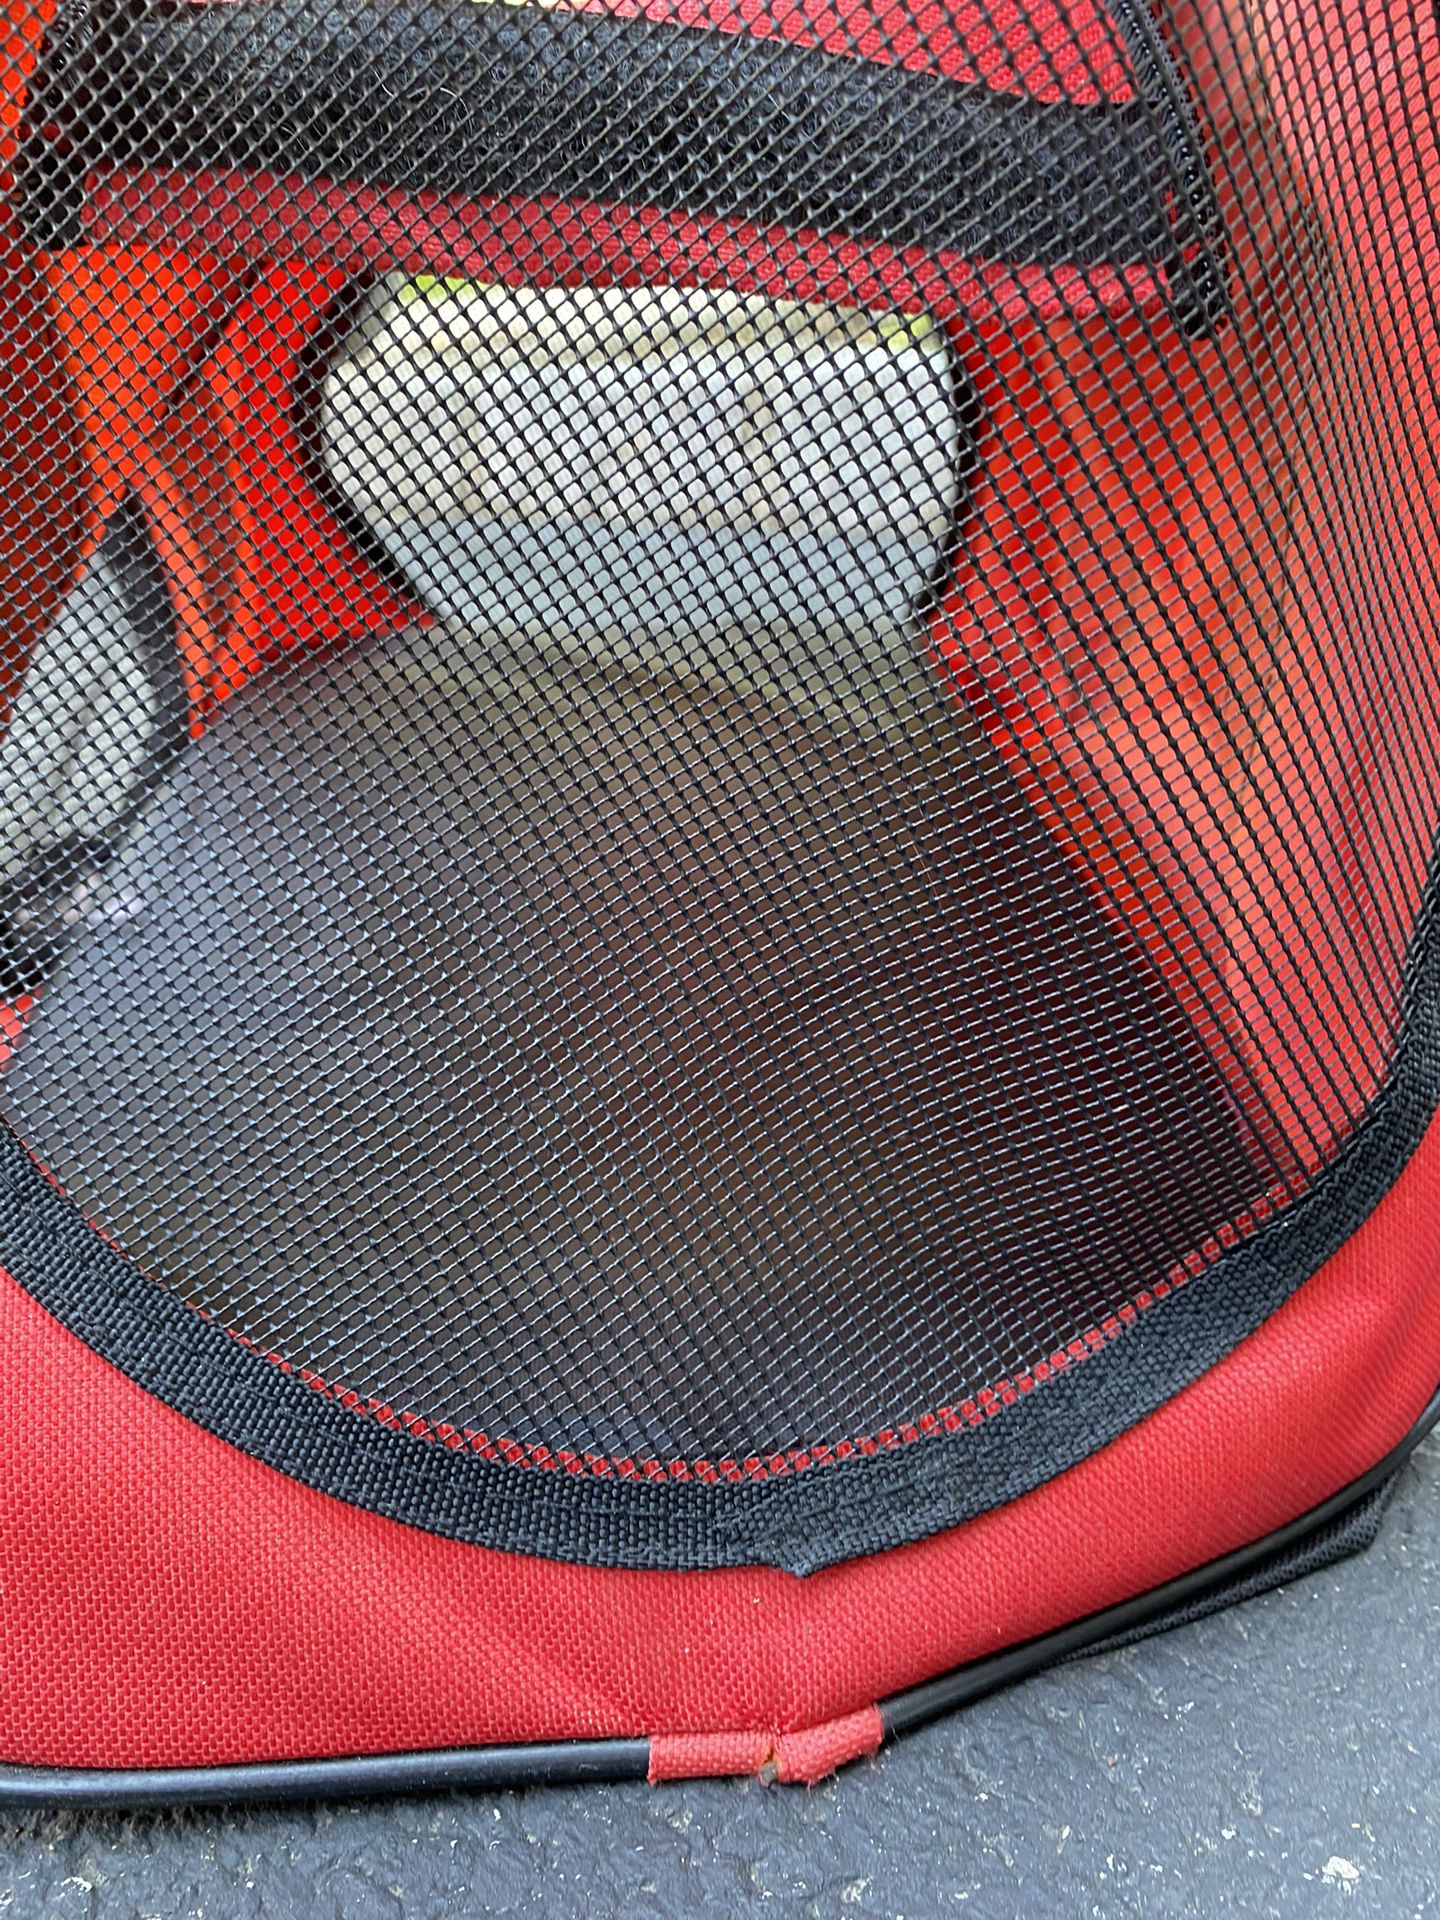 Red Small Soft Sided 360 Degree View Pet Store Cat Dog Animal Transport Carrier 19” long x 11” high’ x 11” wide